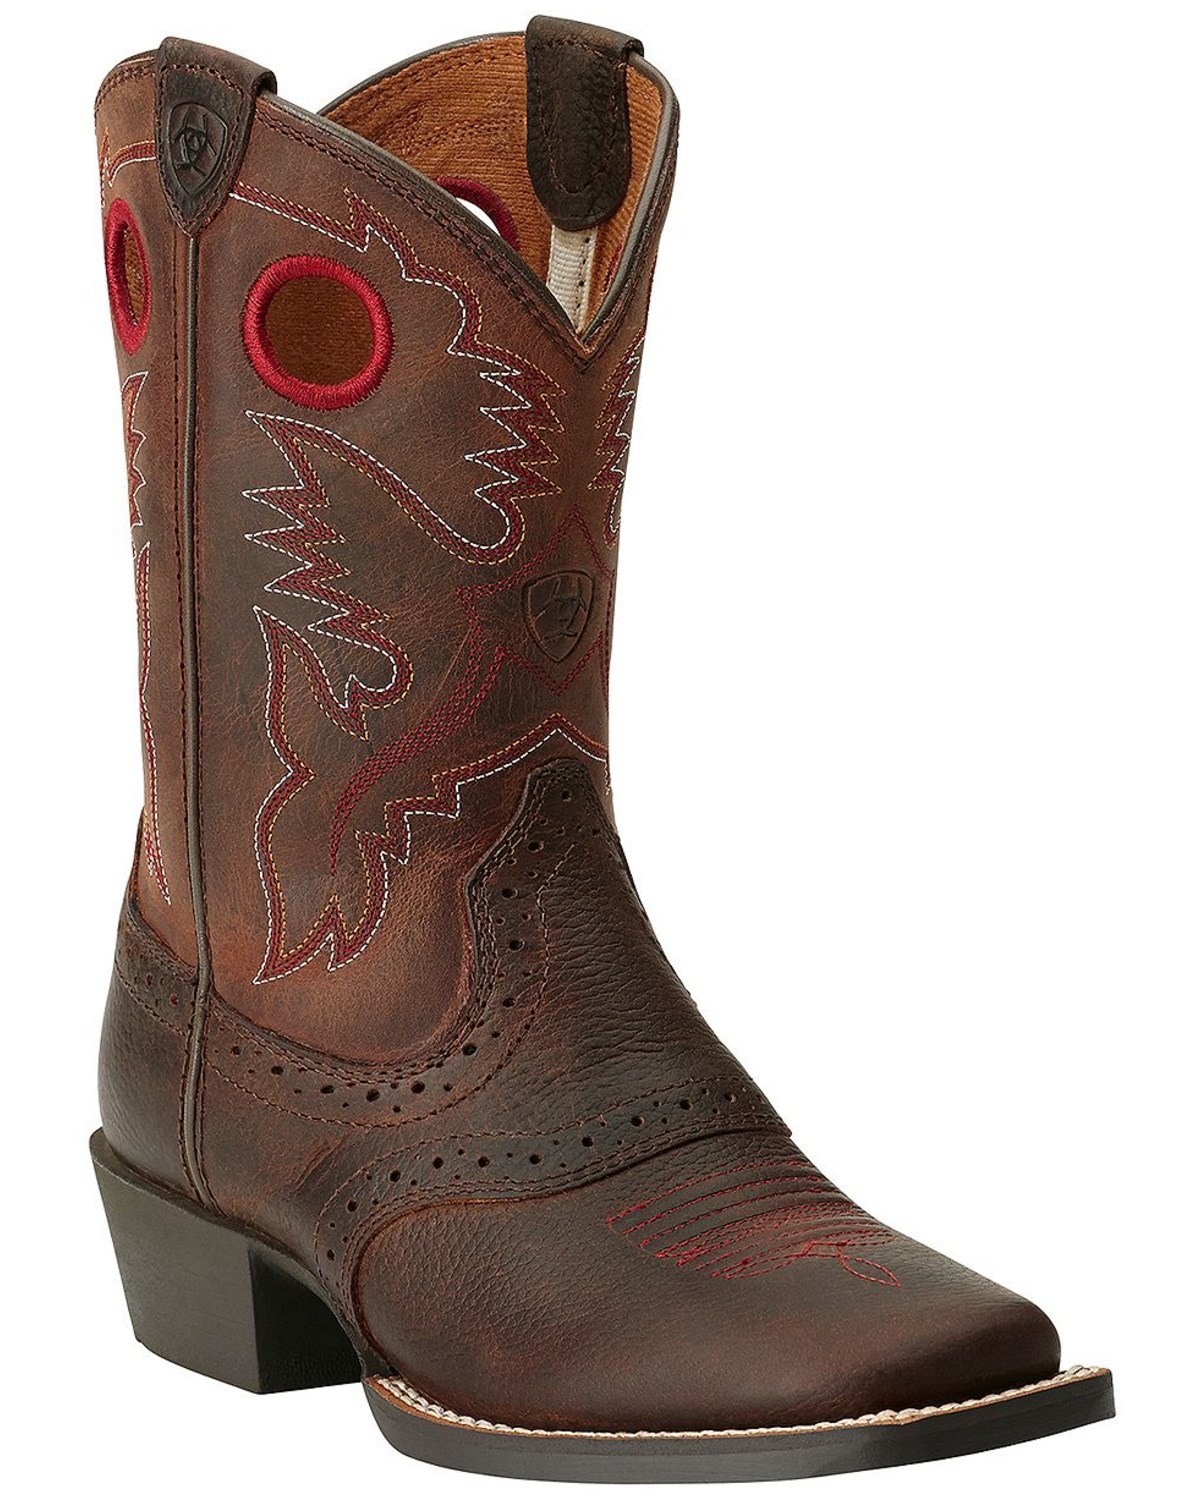 Ariat Boys' Rough Stock Western Boots - Square Toe